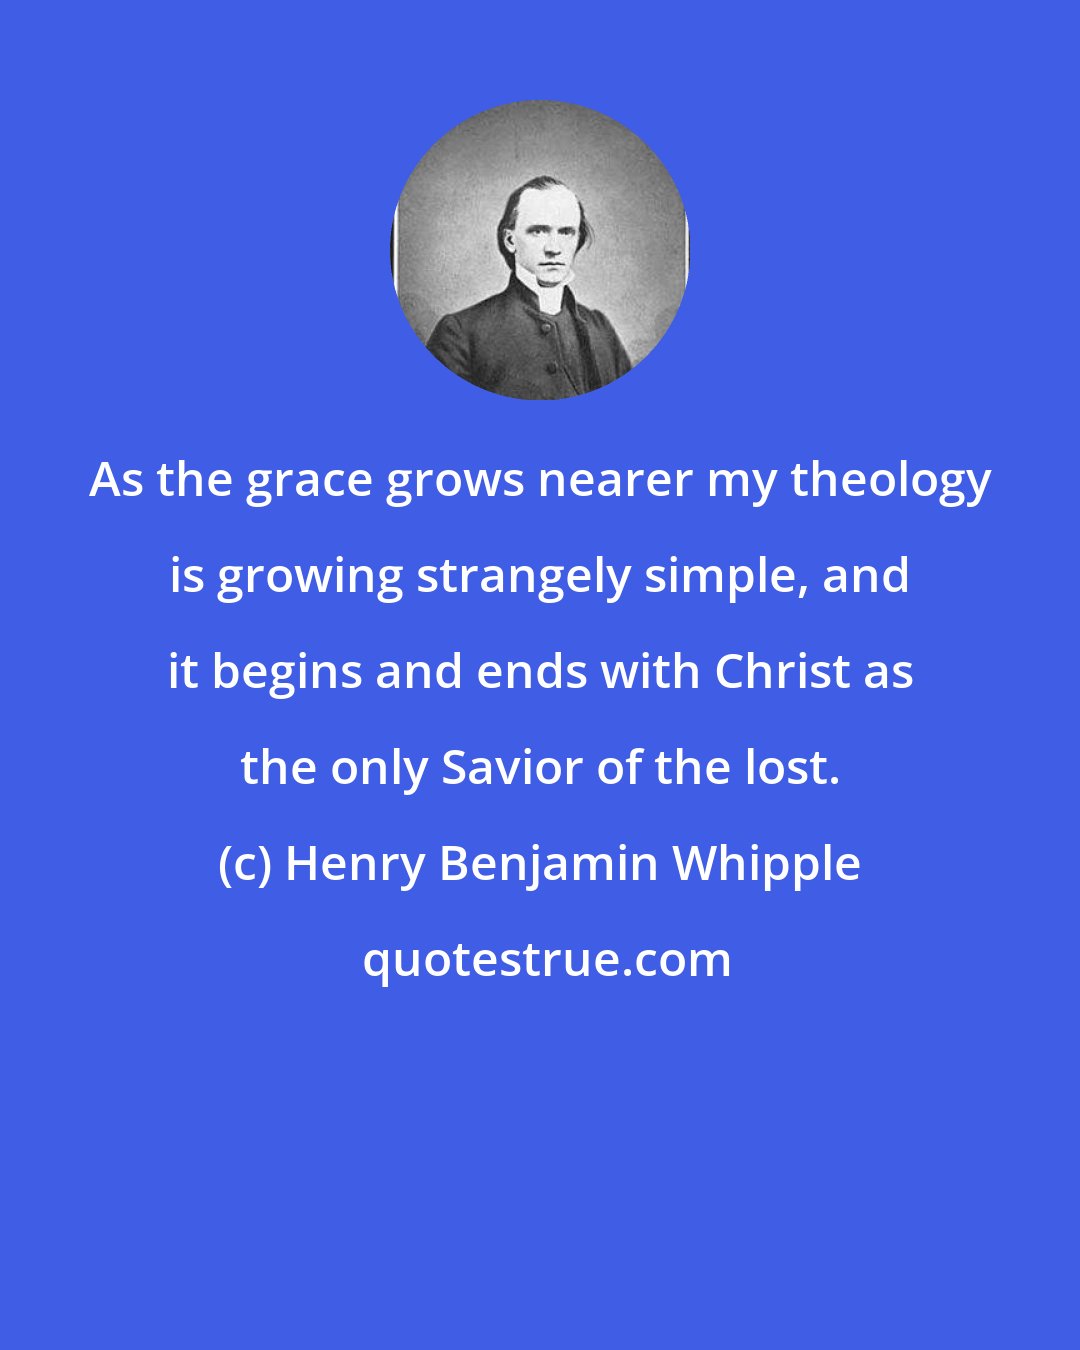 Henry Benjamin Whipple: As the grace grows nearer my theology is growing strangely simple, and it begins and ends with Christ as the only Savior of the lost.